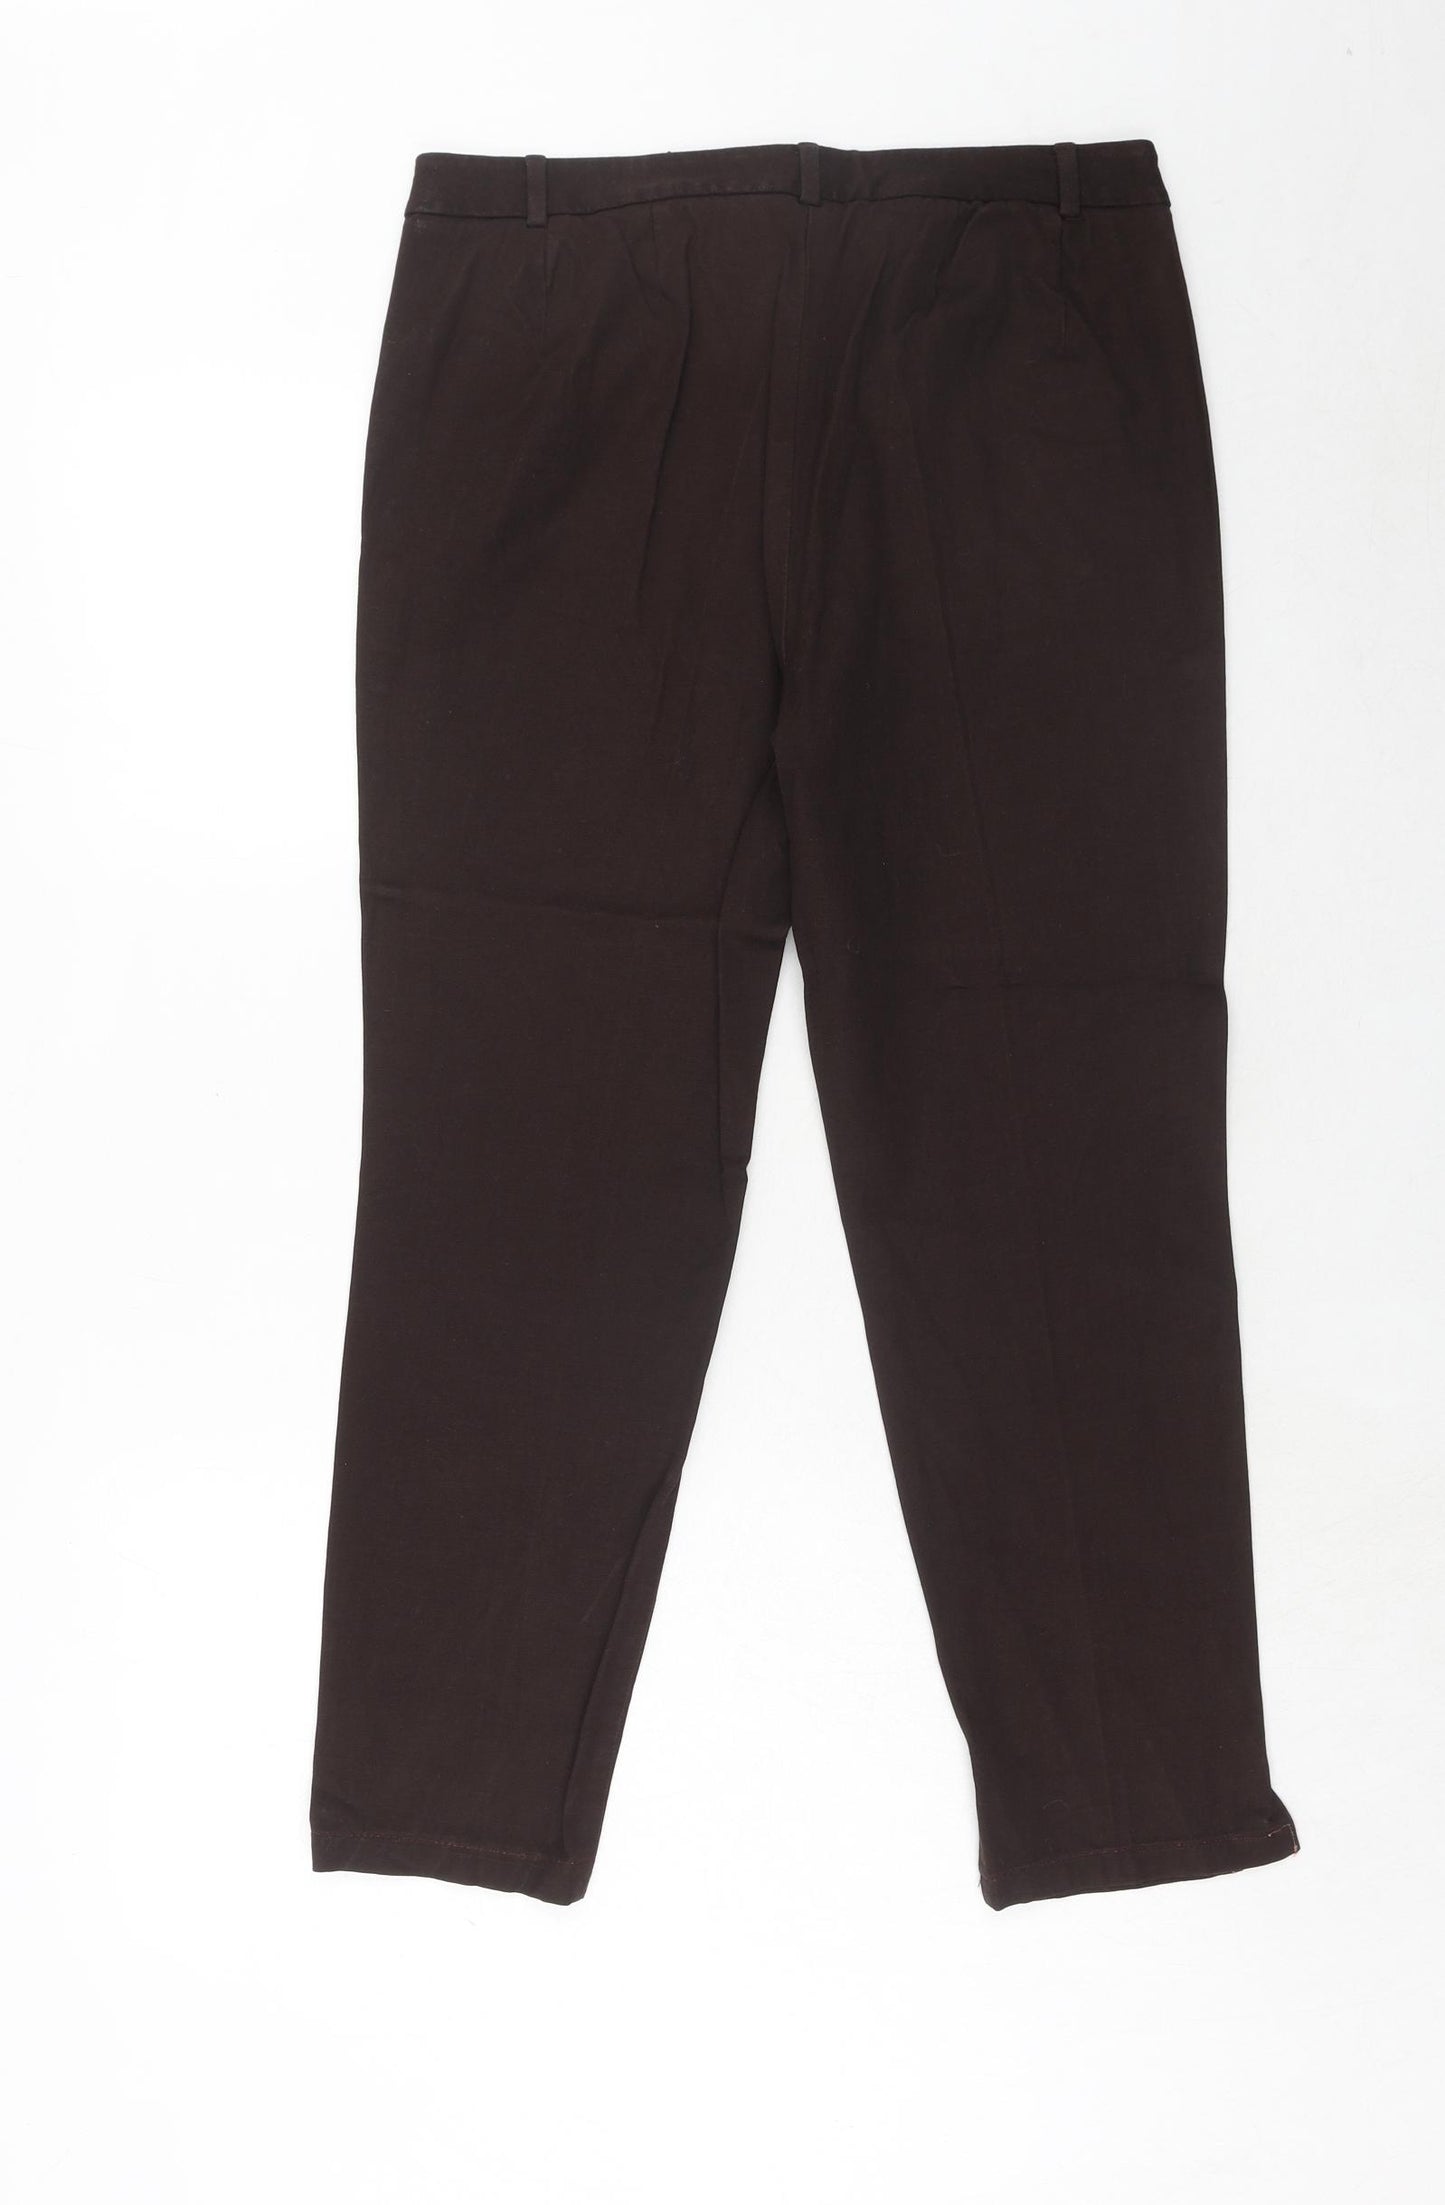 Marks and Spencer Womens Brown Viscose Trousers Size 14 Regular Hook & Eye